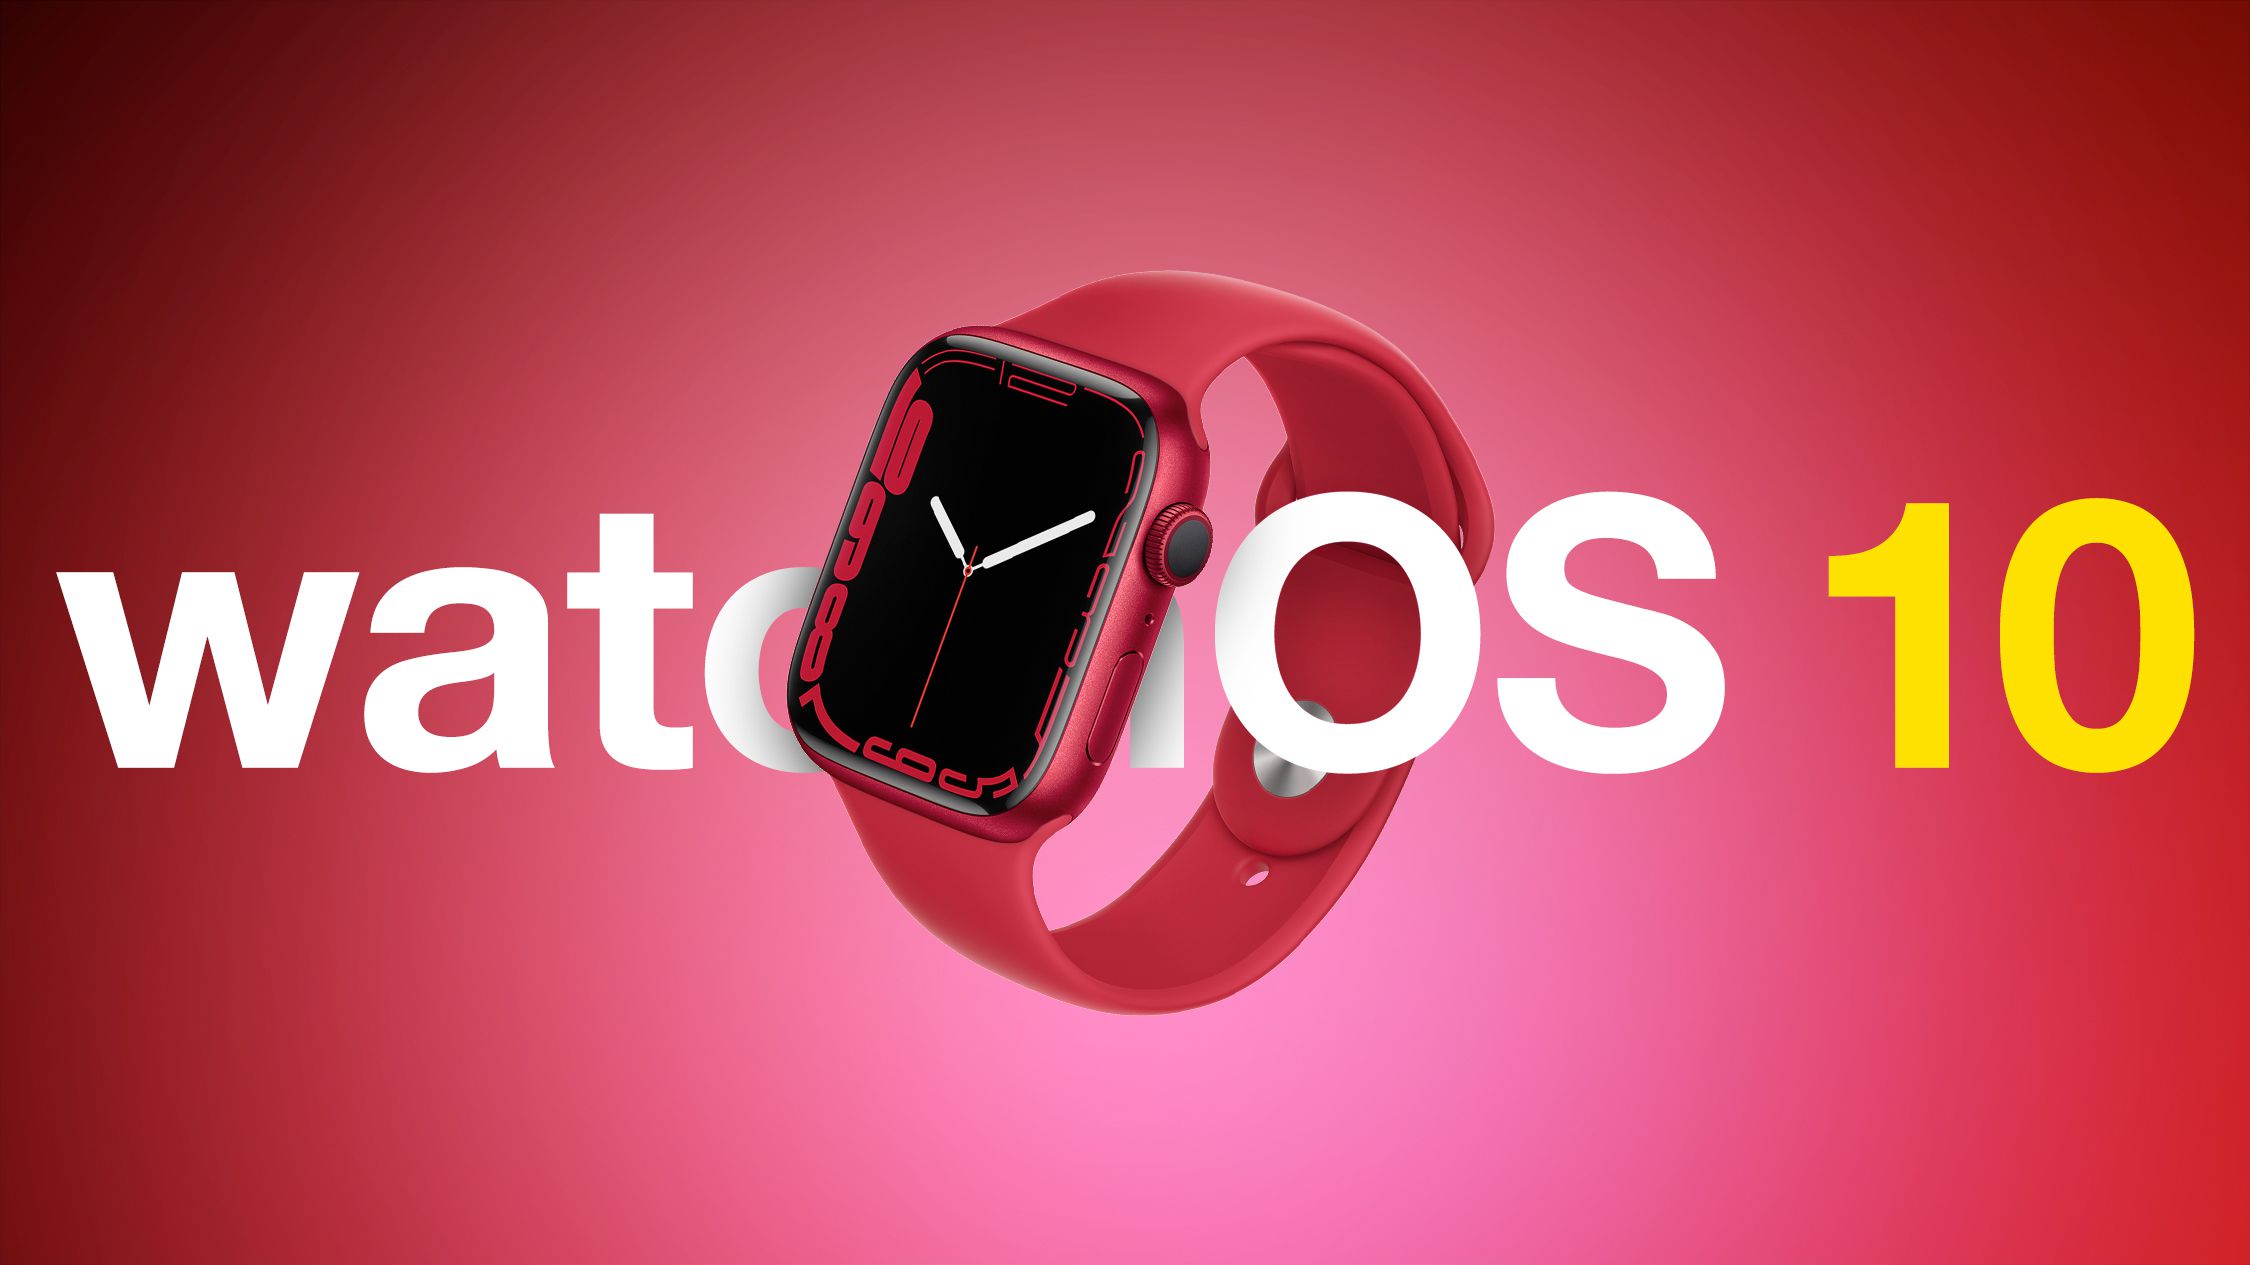 Apple Seeds Release Candidate Version of watchOS 10 to Developers